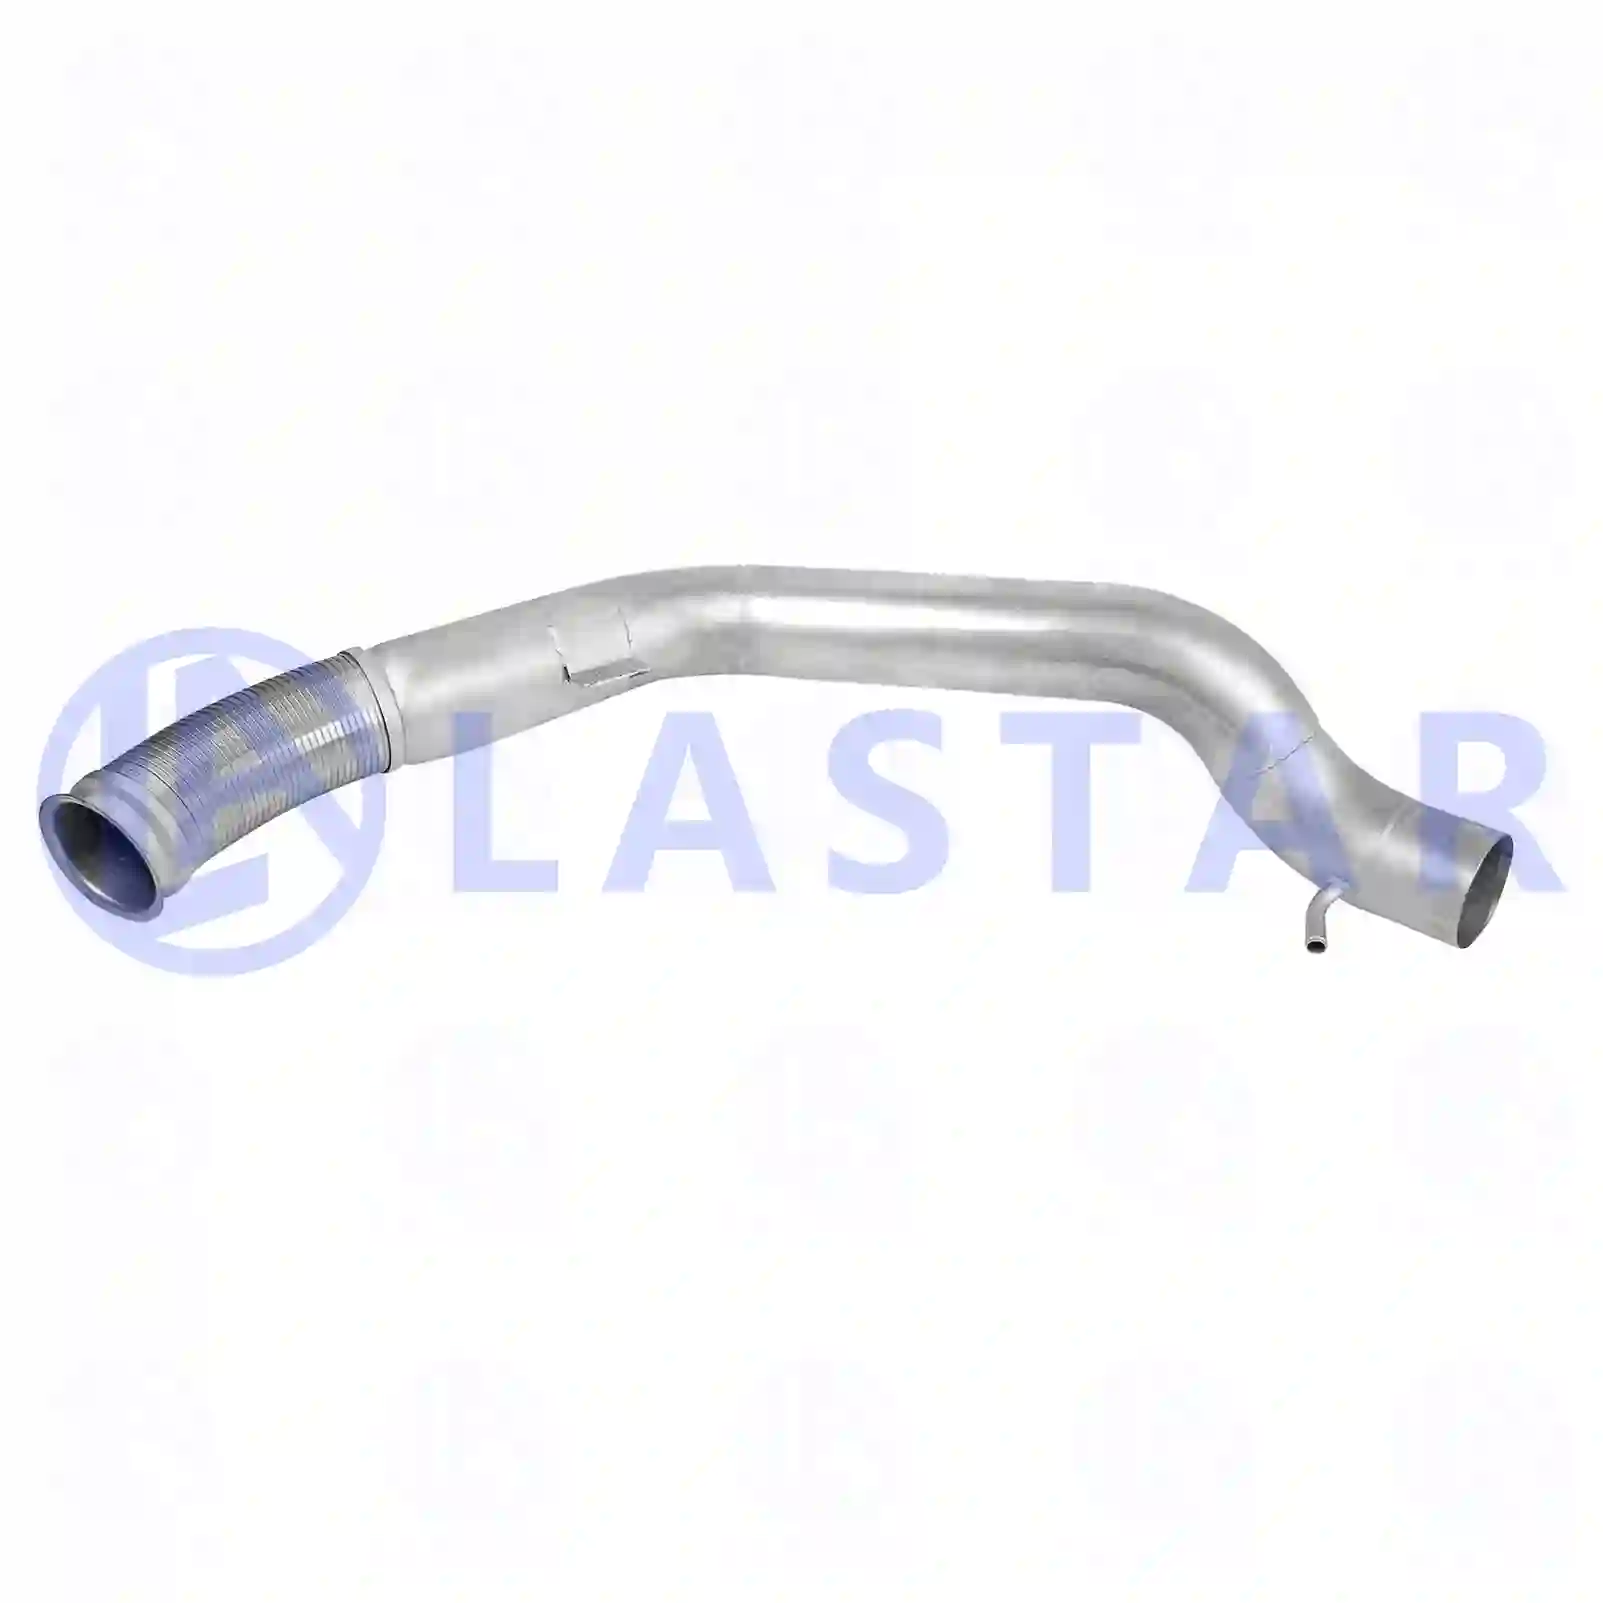 Exhaust pipe, 77706781, 41210895 ||  77706781 Lastar Spare Part | Truck Spare Parts, Auotomotive Spare Parts Exhaust pipe, 77706781, 41210895 ||  77706781 Lastar Spare Part | Truck Spare Parts, Auotomotive Spare Parts